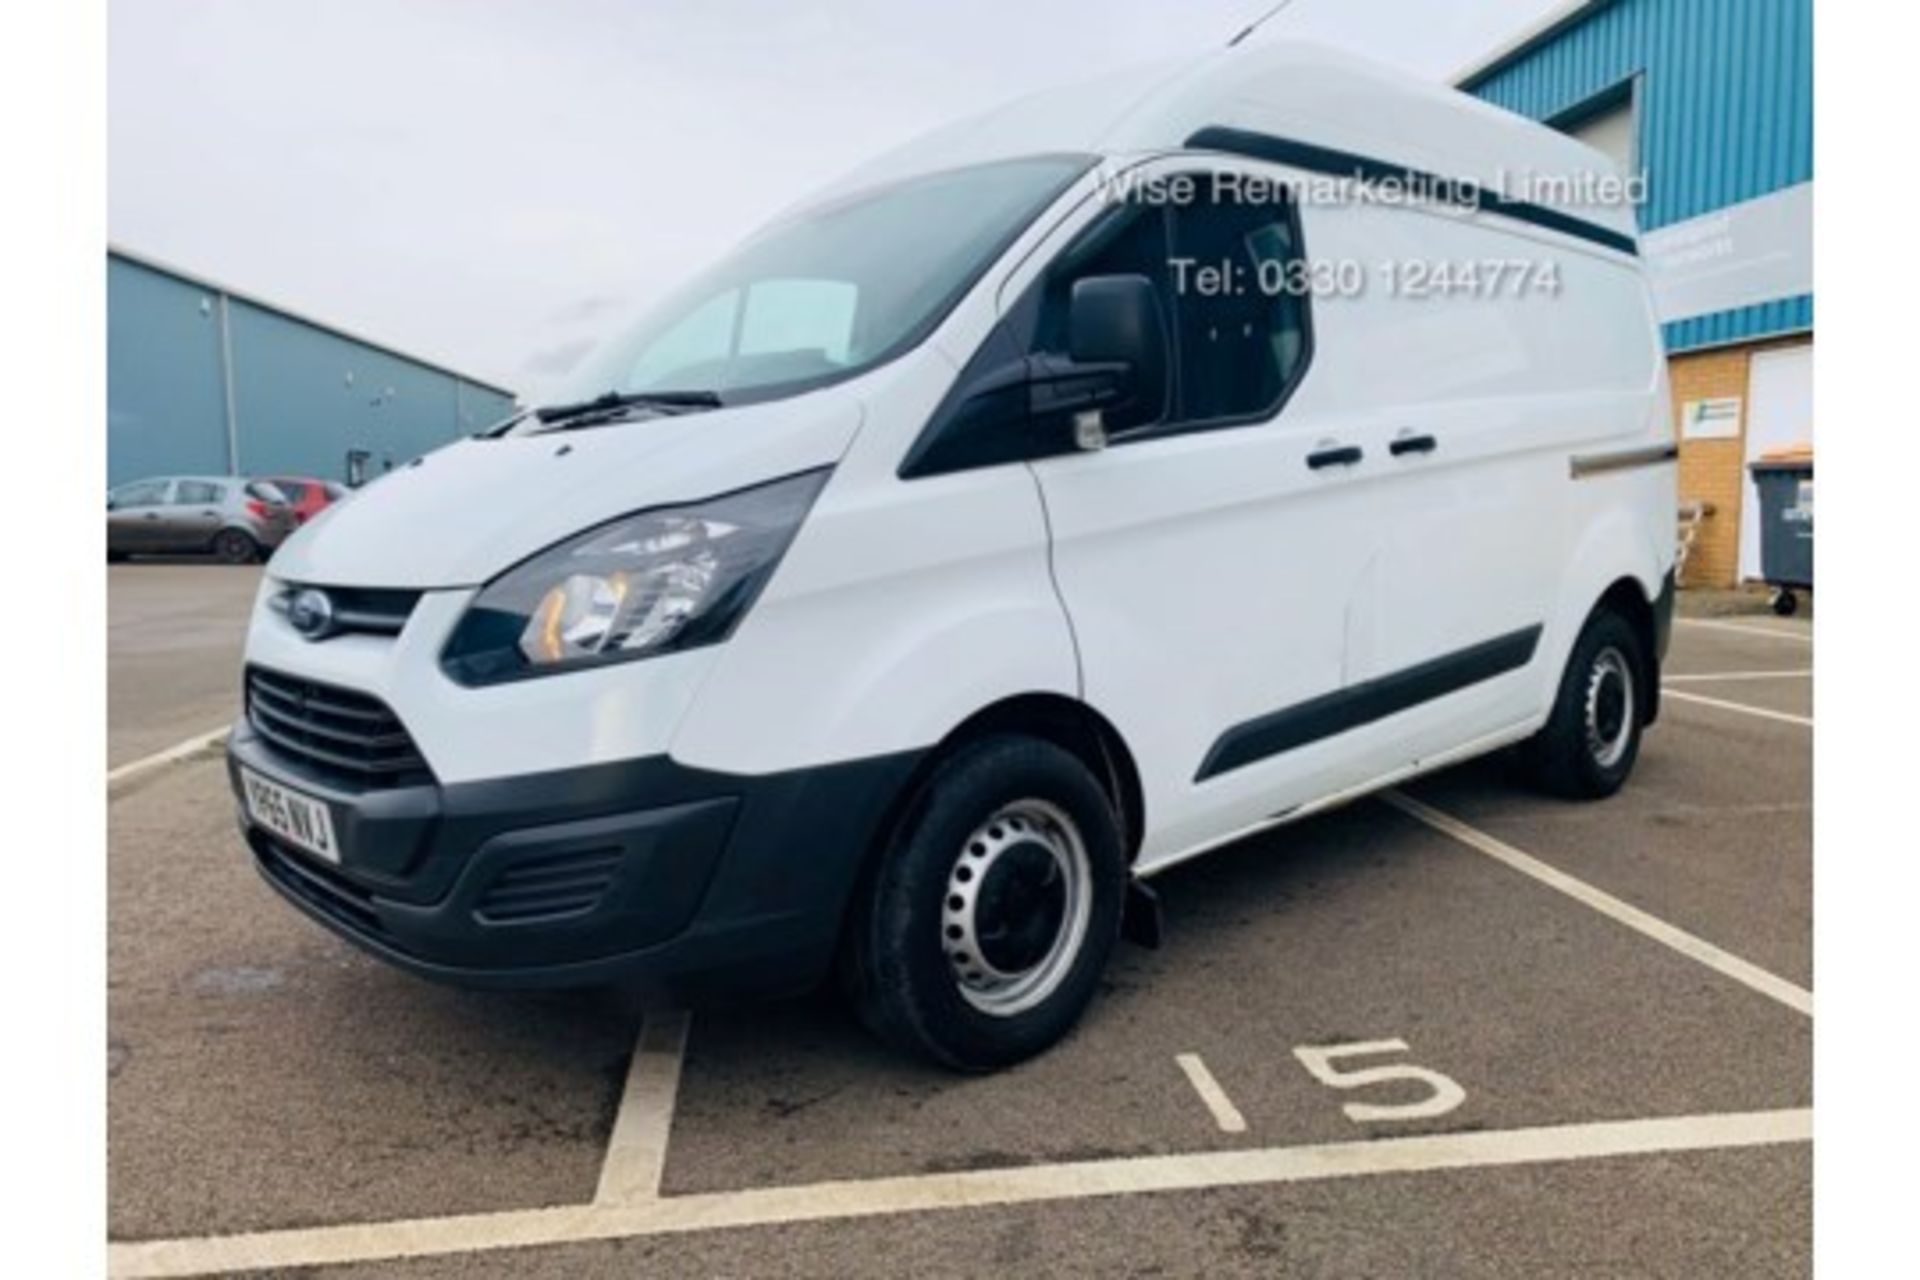 (RESERVE MET)Ford Transit Custom 2.2 TDCI 290 **HIGH ROOF** - 2016 model - AIR CON- 1 OWNER- FSH- - Image 3 of 18